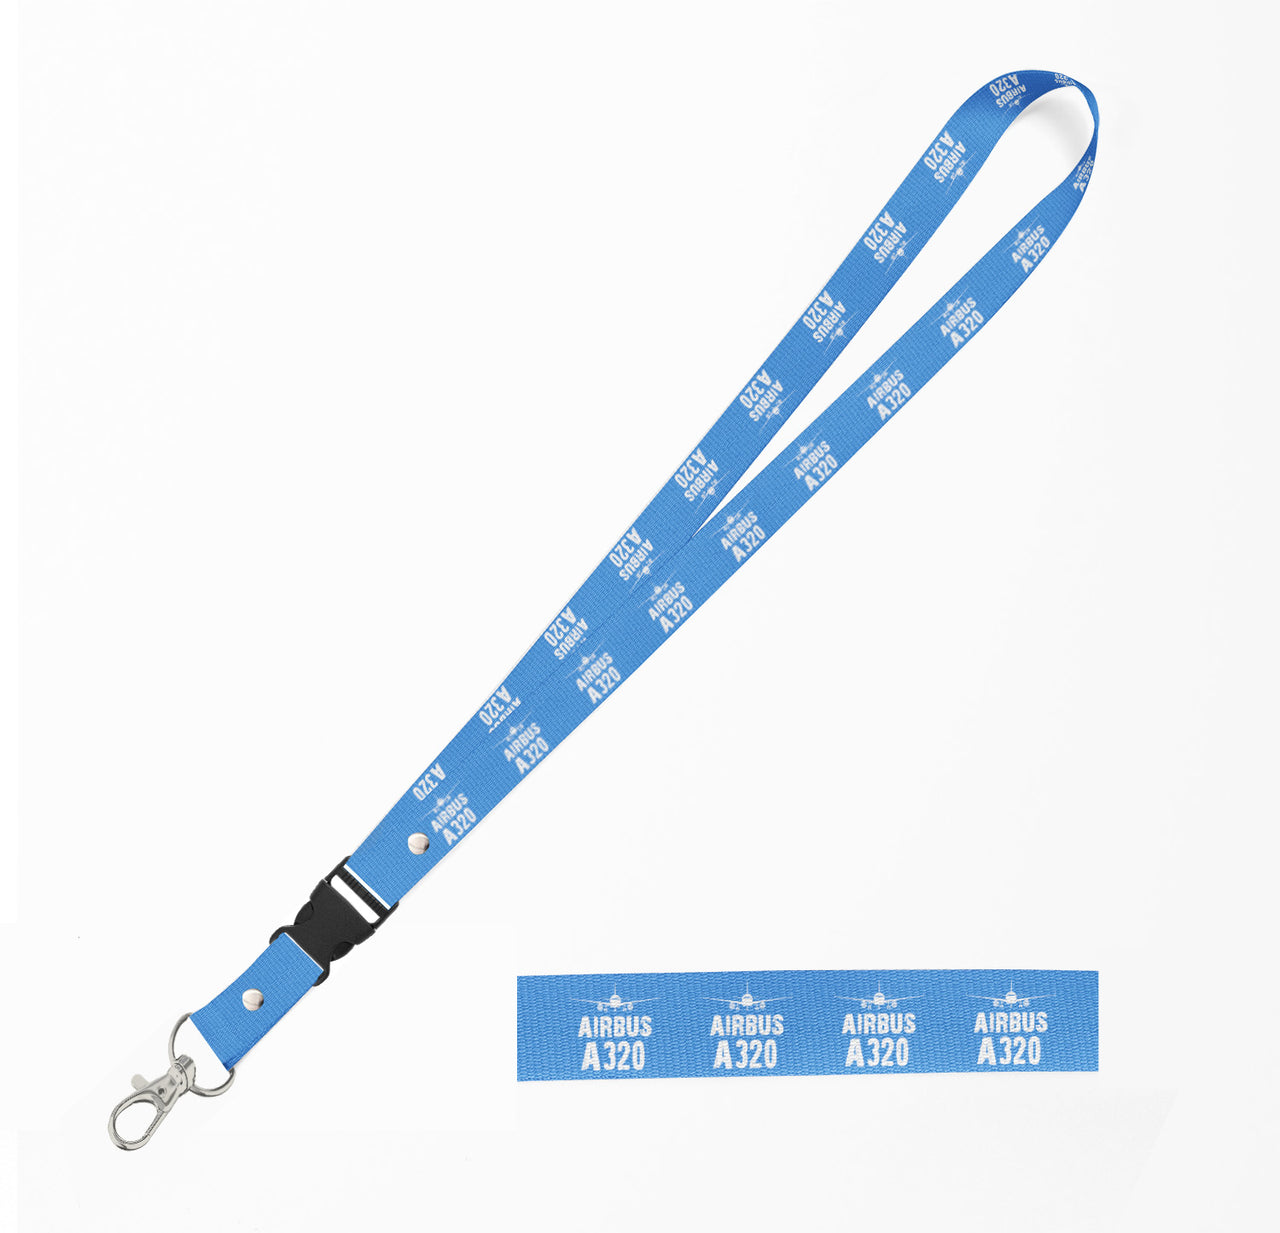 Airbus A320 & Plane Designed Detachable Lanyard & ID Holders